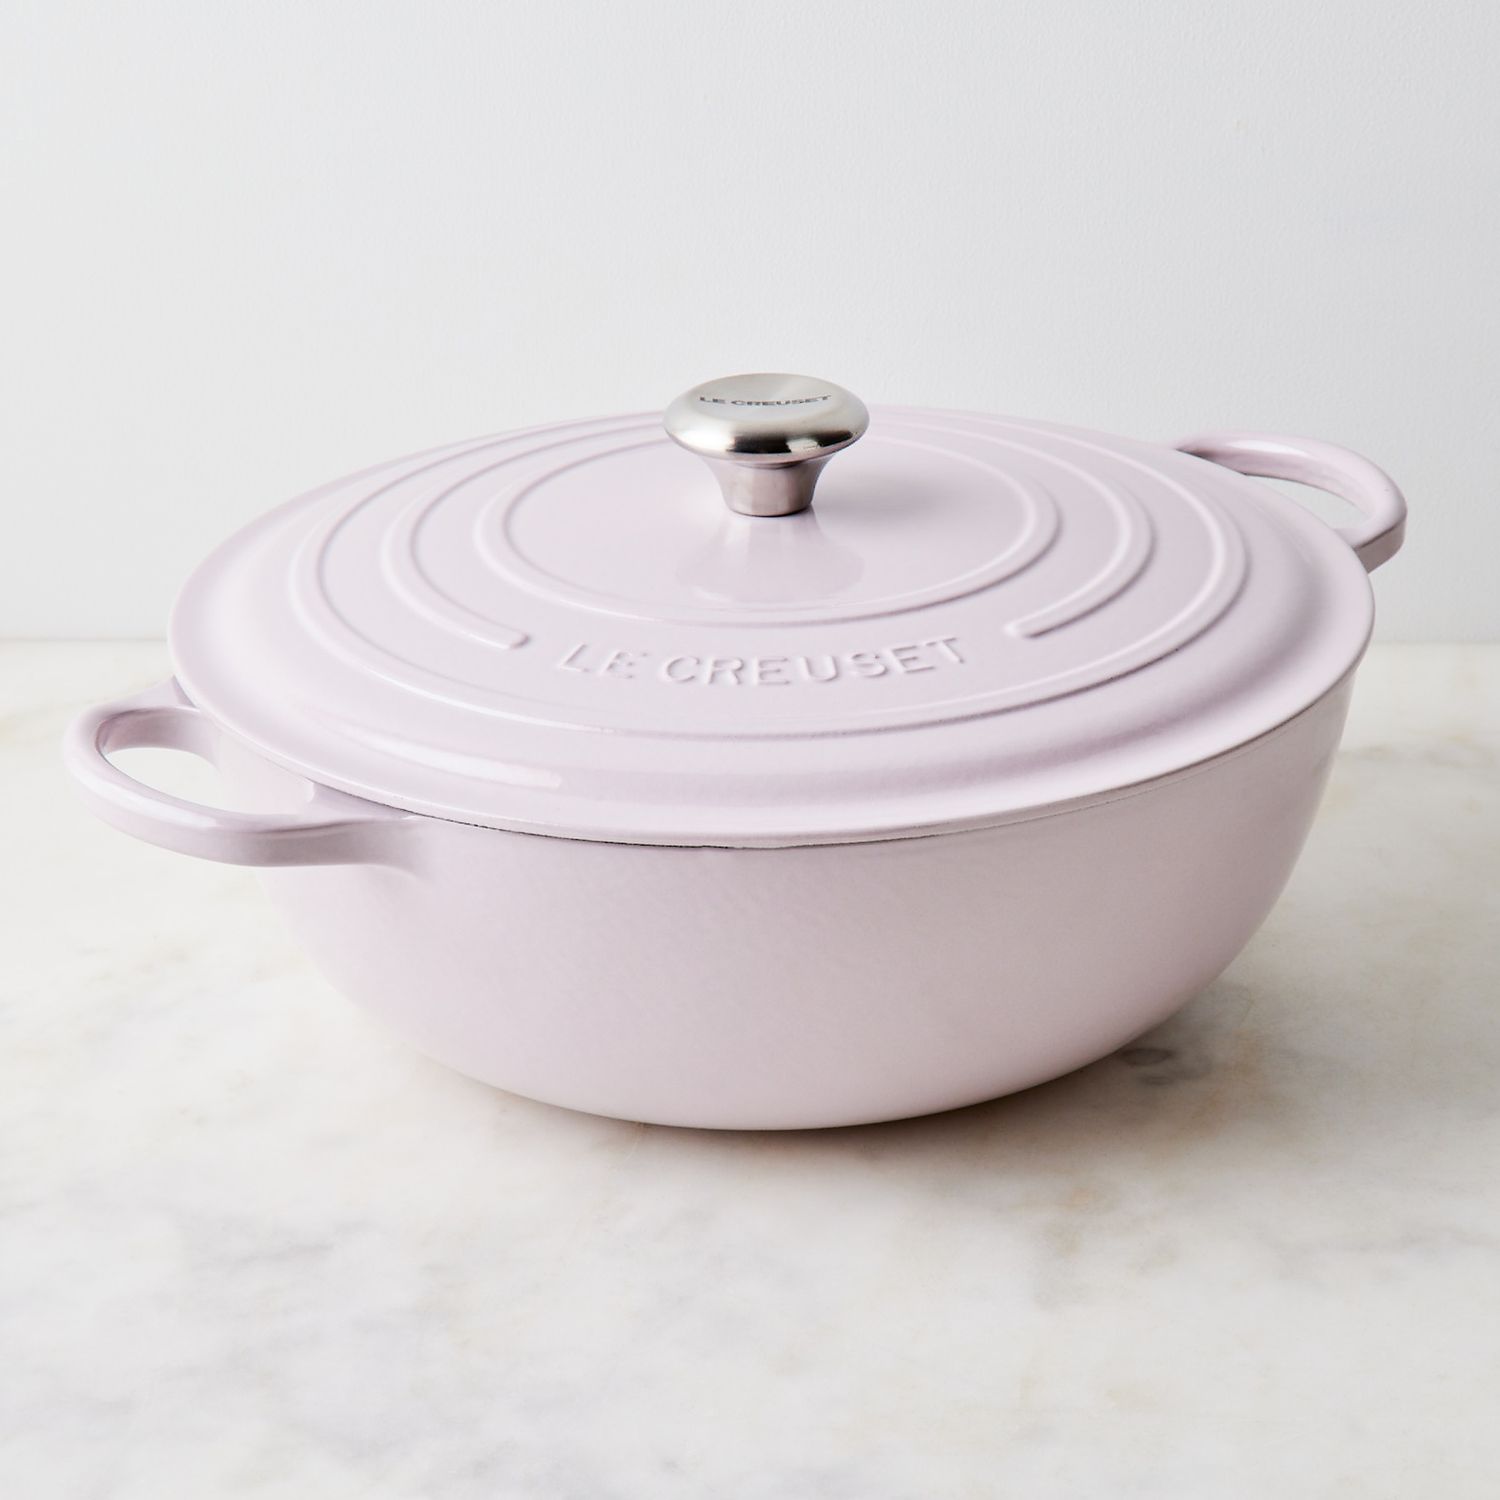  Le Creuset Enameled Cast-Iron 7-1/4-Quart Round French Oven,  Cherry Red: Dutch Ovens: Home & Kitchen